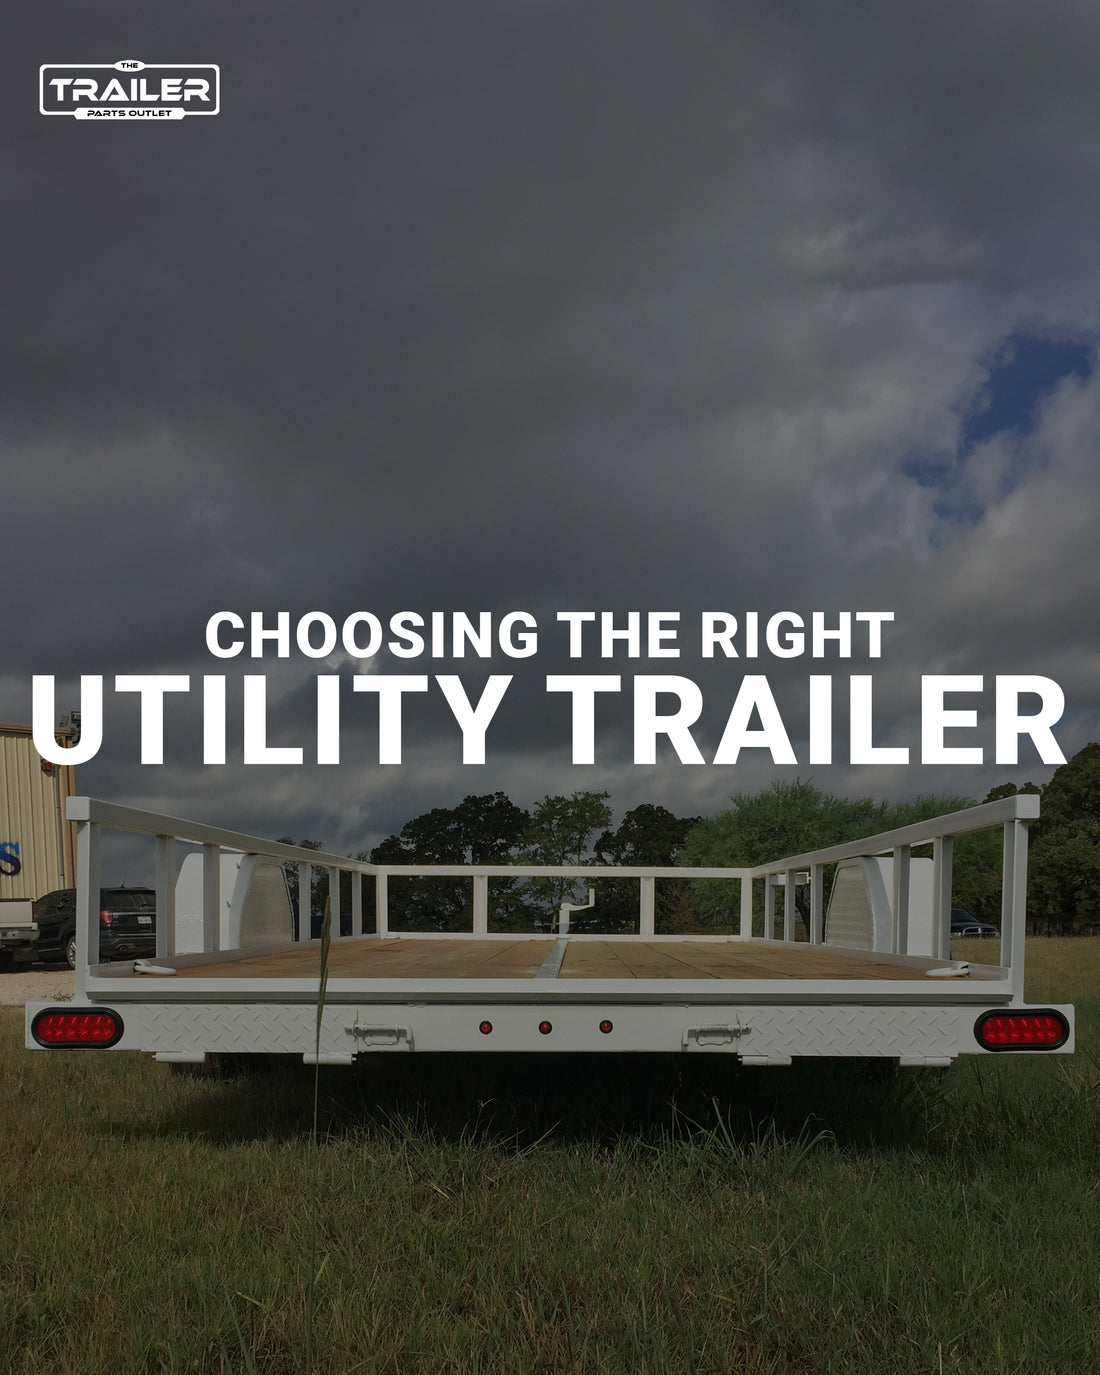 A Guide to Choosing the Right Utility Trailer